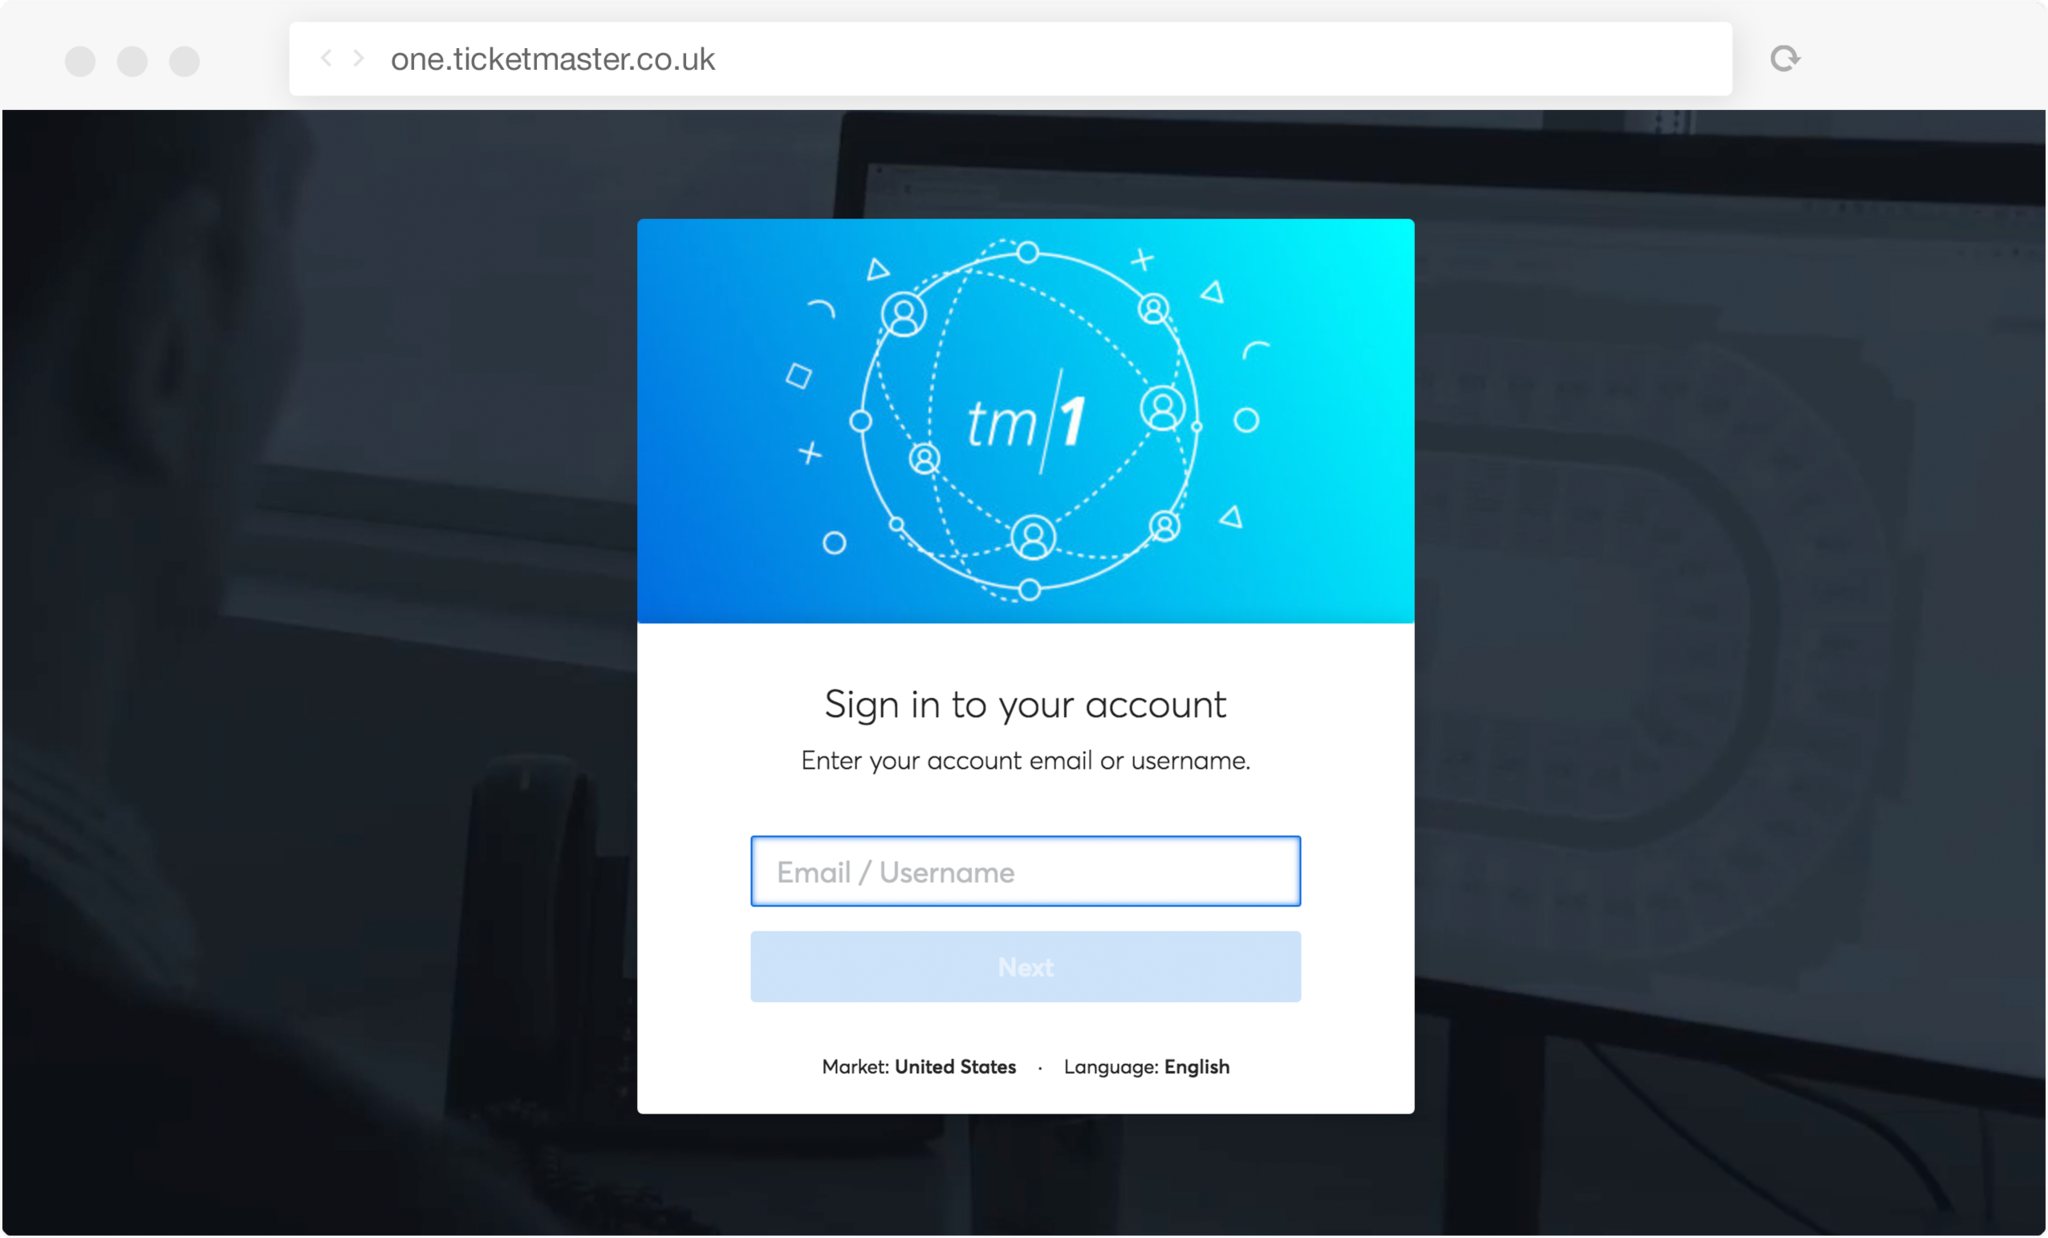 Ticketmaster One is becoming TM1 and it’s getting a new look!